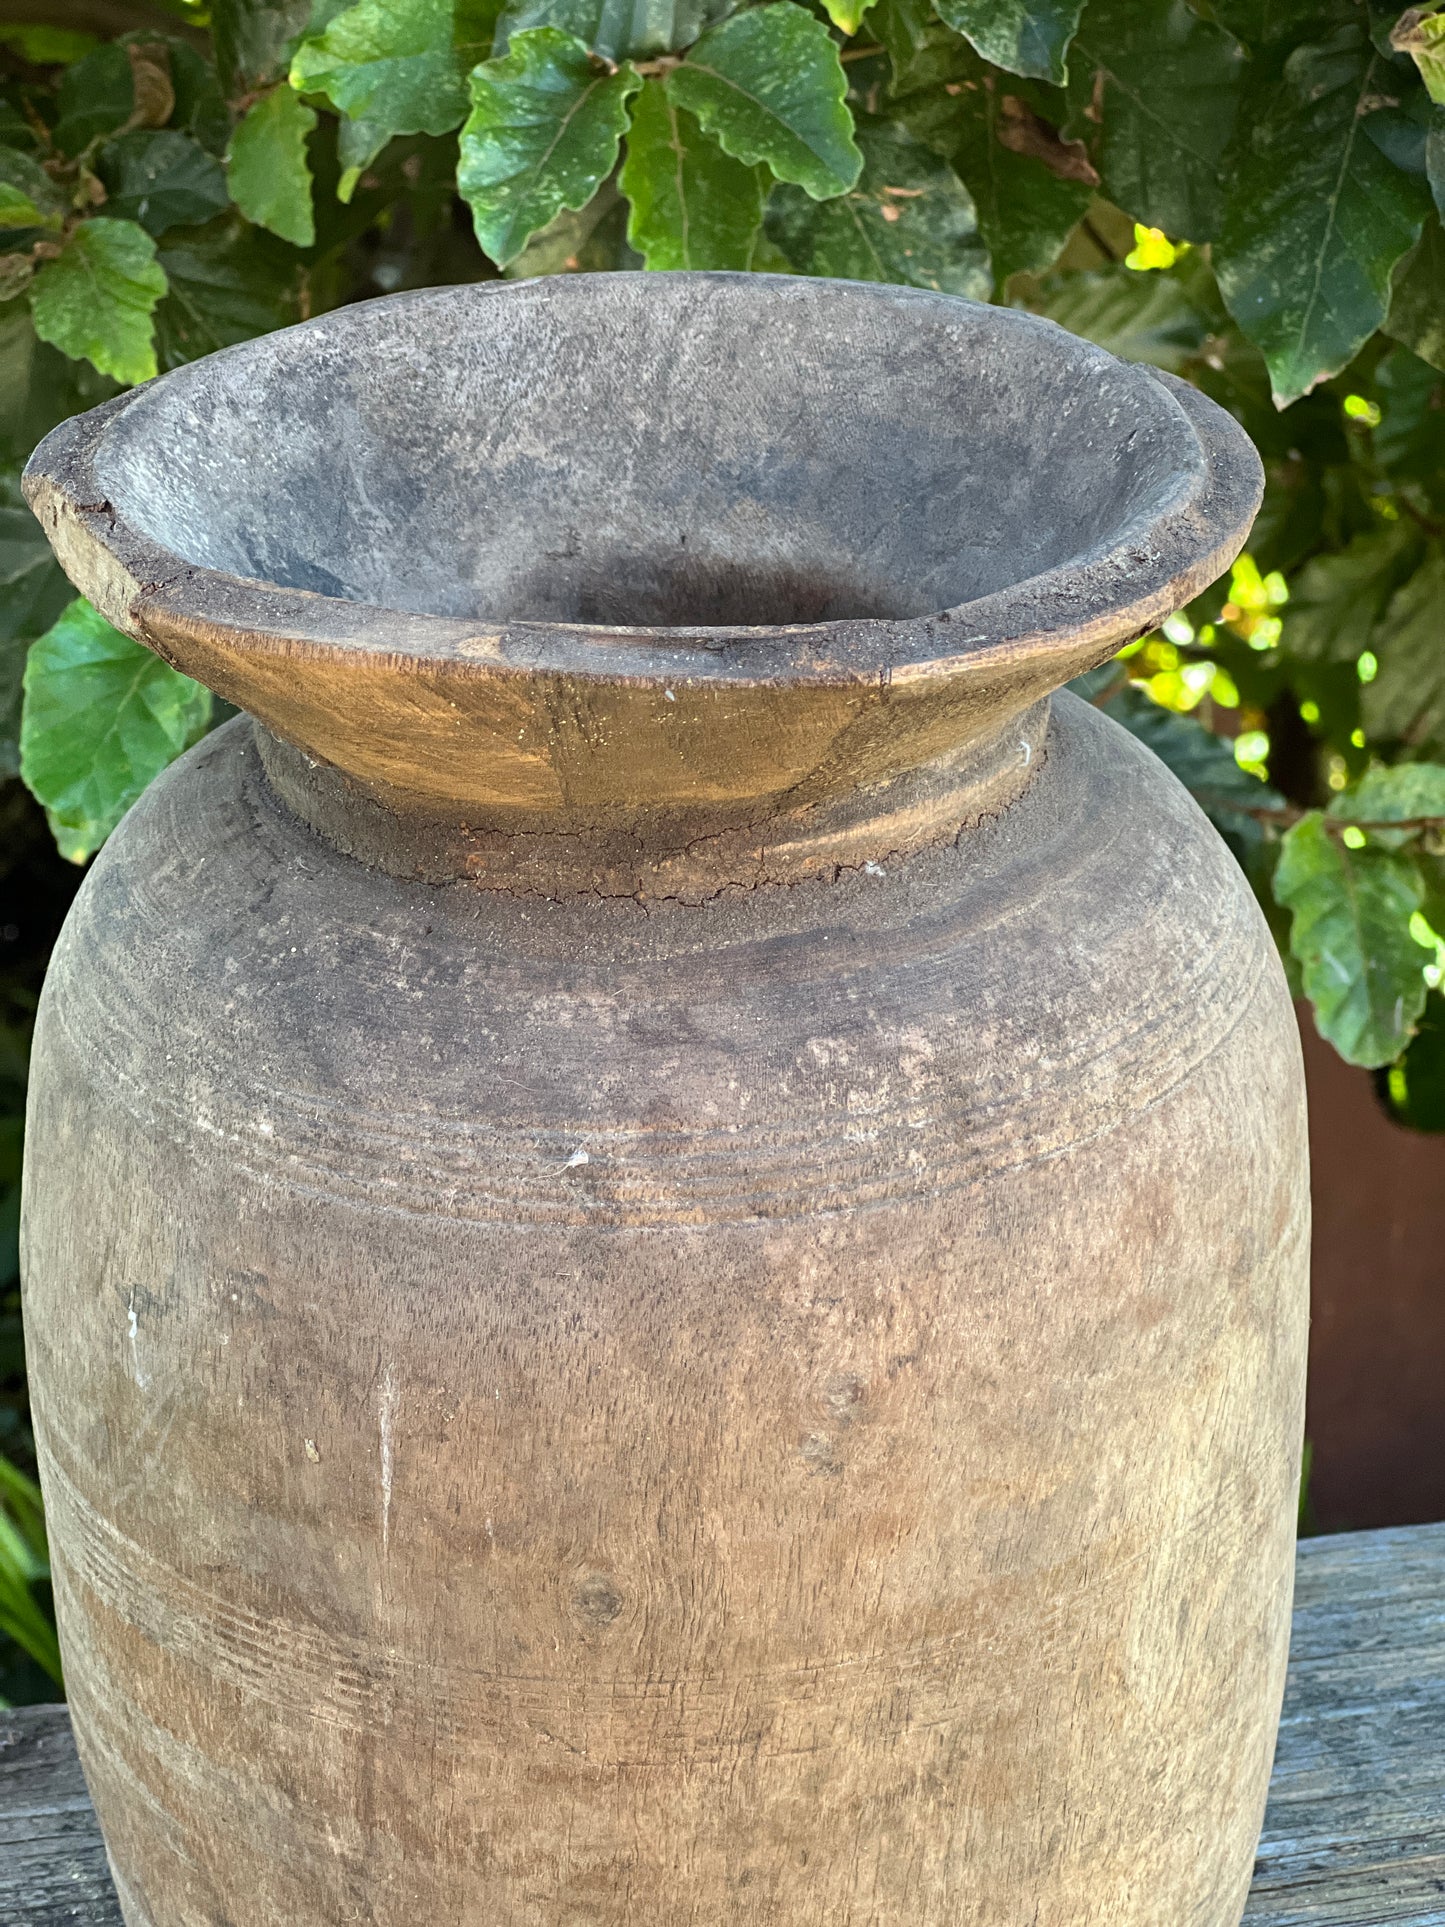 Old nepalese pot (4)